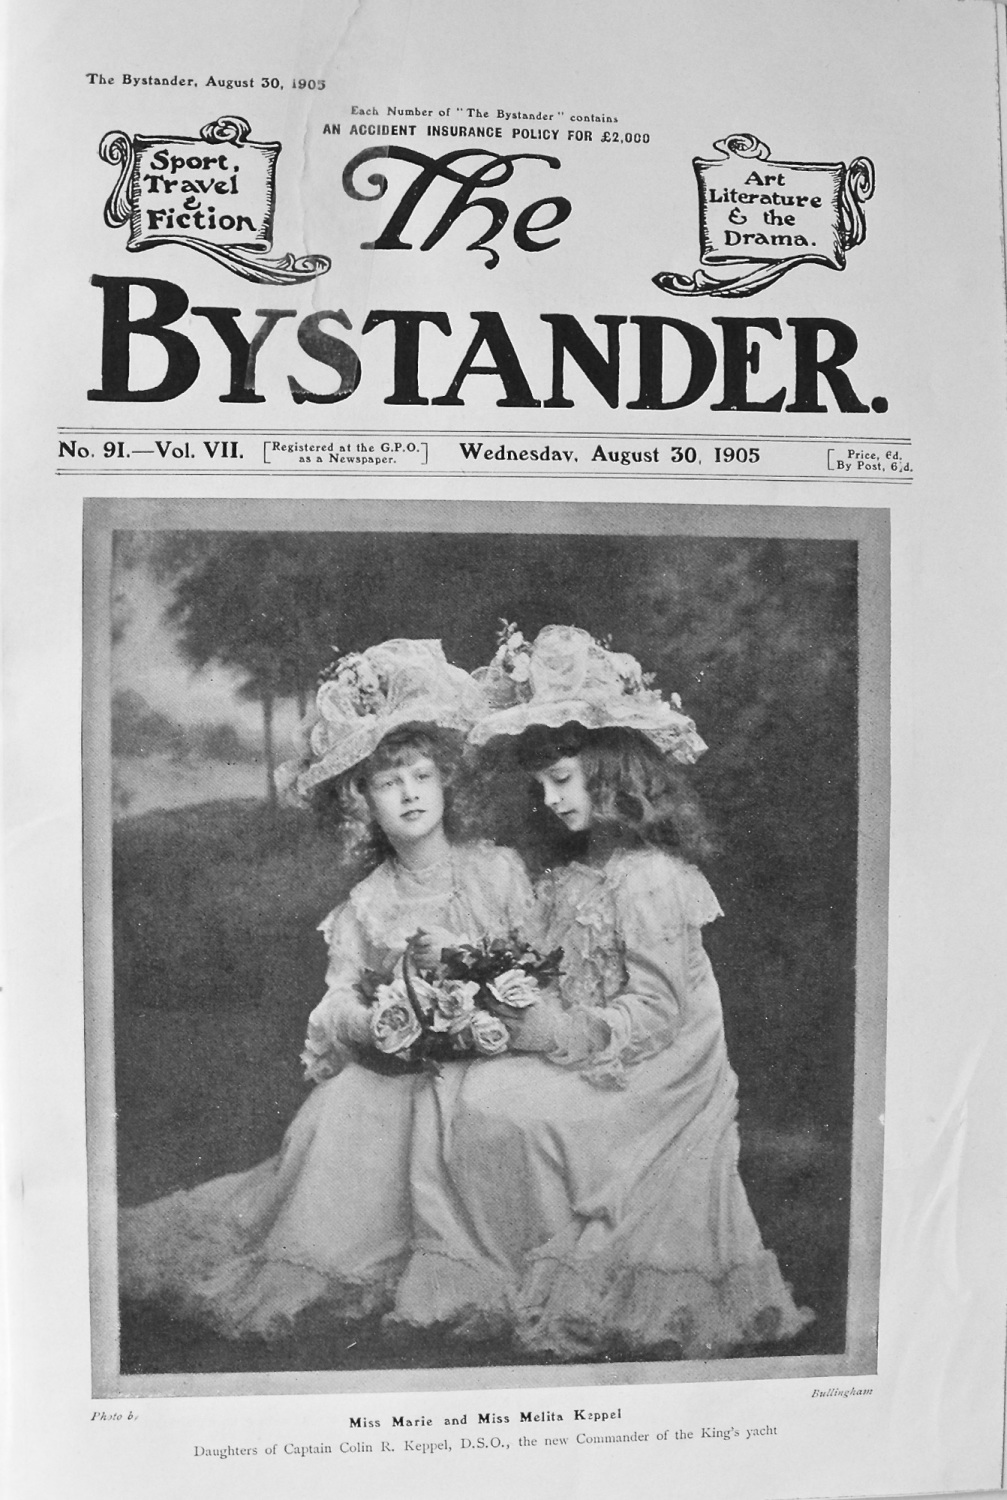 The Bystander, Wednesday August 30, 1905